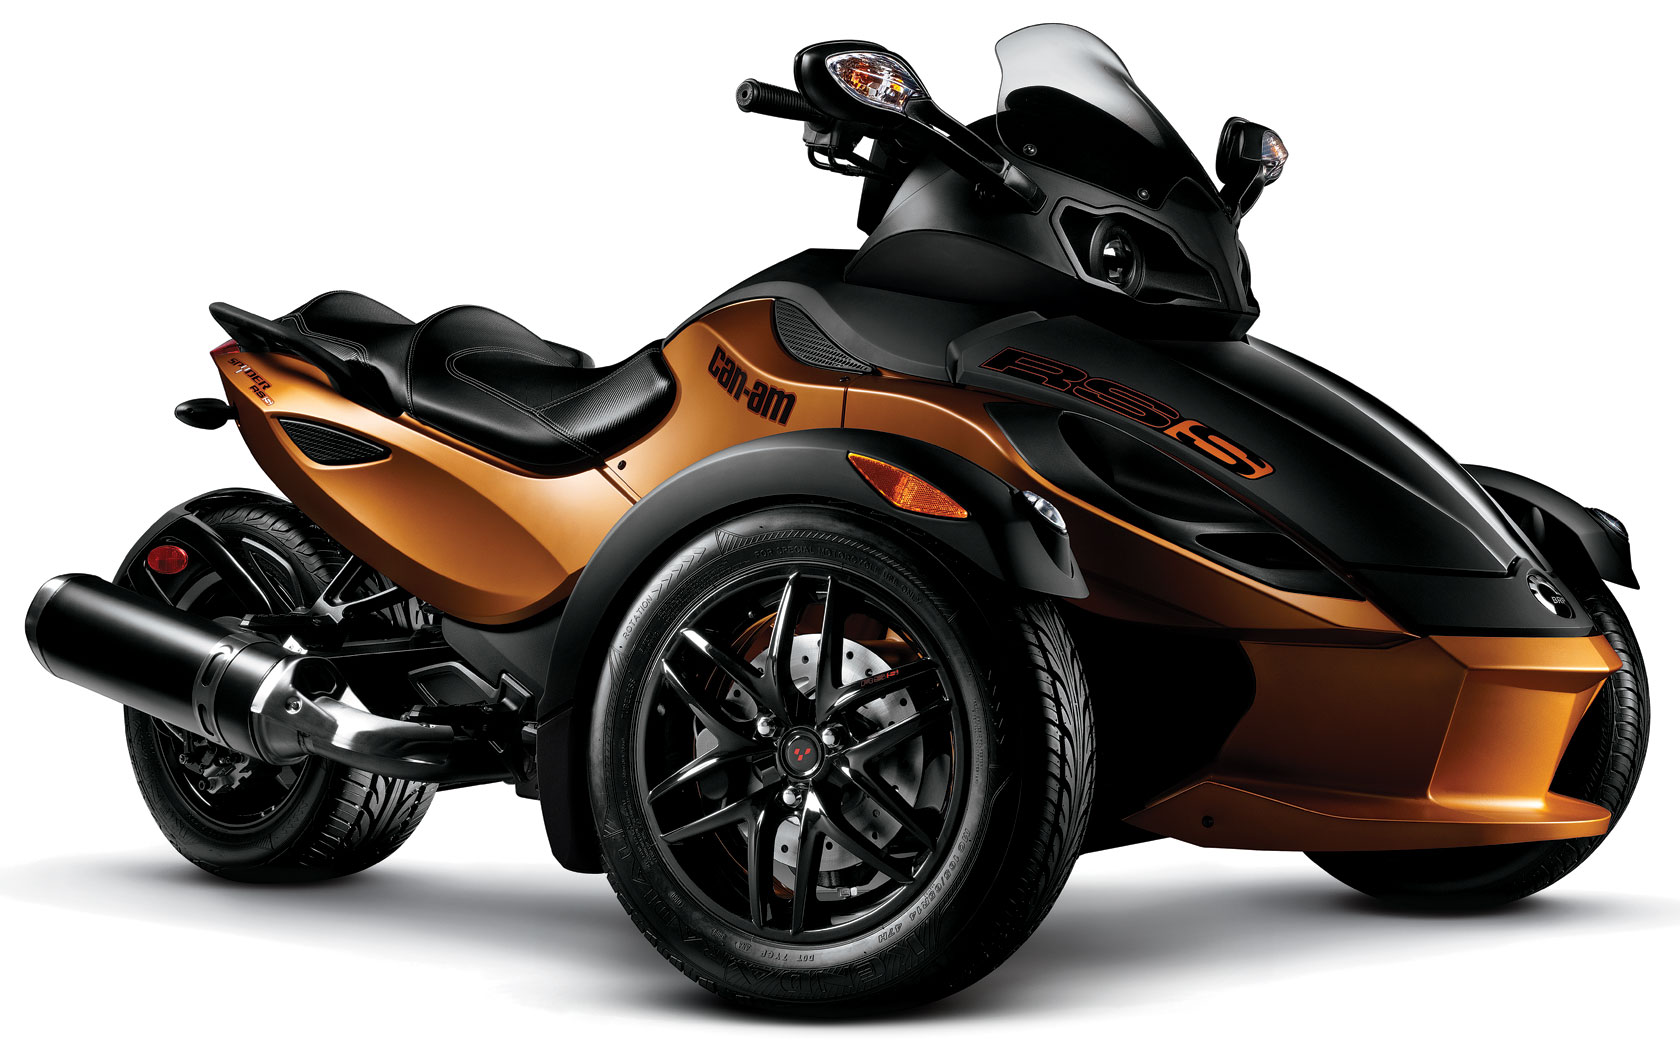 Can-Am Spyder RS-S 2010 #4